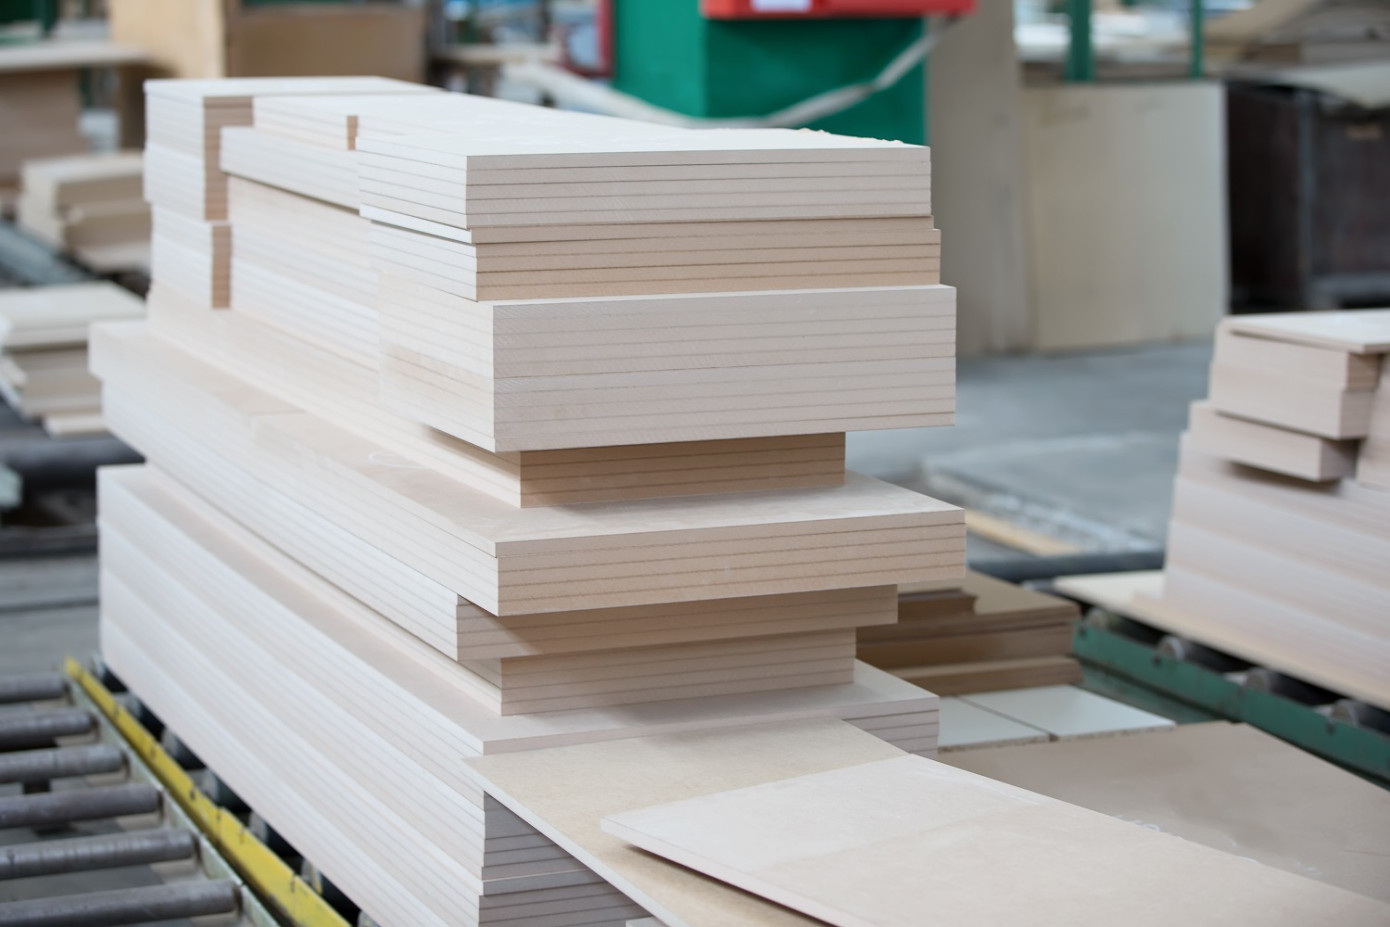 Russian plywood exports down 41% in 2022